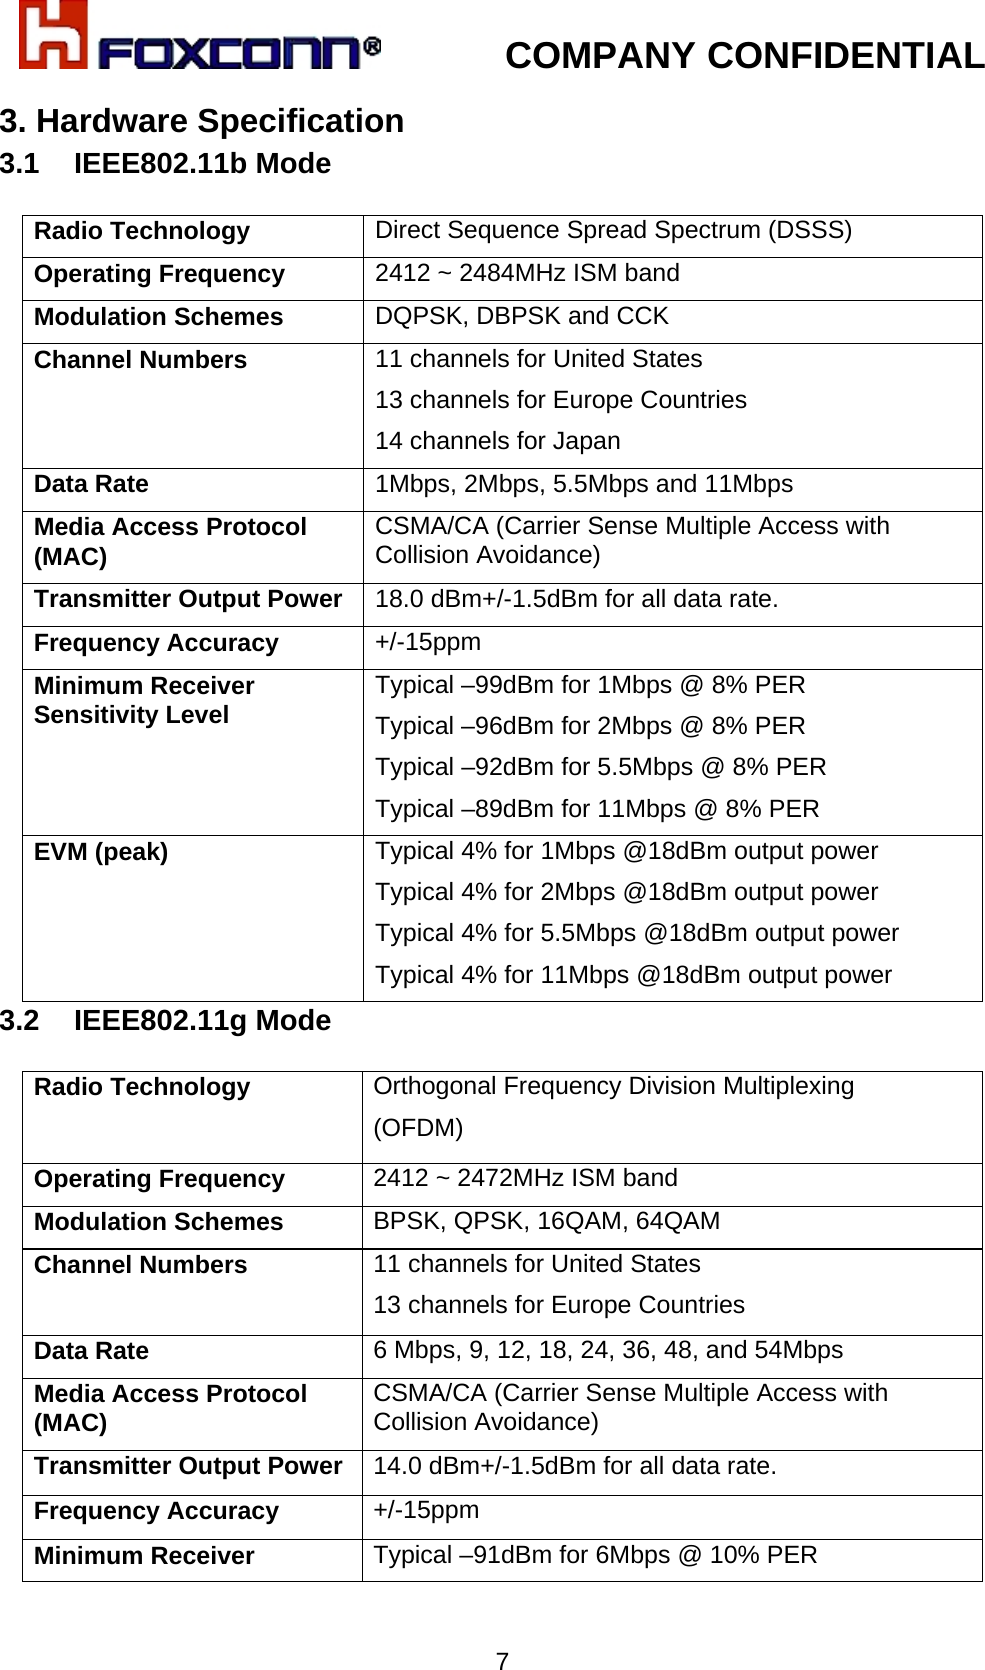            COMPANY CONFIDENTIAL   73. Hardware Specification 3.1 IEEE802.11b Mode  Radio Technology  Direct Sequence Spread Spectrum (DSSS) Operating Frequency  2412 ~ 2484MHz ISM band Modulation Schemes  DQPSK, DBPSK and CCK Channel Numbers  11 channels for United States 13 channels for Europe Countries 14 channels for Japan Data Rate  1Mbps, 2Mbps, 5.5Mbps and 11Mbps Media Access Protocol (MAC)  CSMA/CA (Carrier Sense Multiple Access with Collision Avoidance) Transmitter Output Power  18.0 dBm+/-1.5dBm for all data rate. Frequency Accuracy  +/-15ppm Minimum Receiver Sensitivity Level  Typical –99dBm for 1Mbps @ 8% PER Typical –96dBm for 2Mbps @ 8% PER Typical –92dBm for 5.5Mbps @ 8% PER Typical –89dBm for 11Mbps @ 8% PER EVM (peak)   Typical 4% for 1Mbps @18dBm output power Typical 4% for 2Mbps @18dBm output power Typical 4% for 5.5Mbps @18dBm output power Typical 4% for 11Mbps @18dBm output power 3.2 IEEE802.11g Mode  Radio Technology  Orthogonal Frequency Division Multiplexing  (OFDM) Operating Frequency  2412 ~ 2472MHz ISM band Modulation Schemes  BPSK, QPSK, 16QAM, 64QAM Channel Numbers  11 channels for United States 13 channels for Europe Countries Data Rate  6 Mbps, 9, 12, 18, 24, 36, 48, and 54Mbps  Media Access Protocol (MAC)  CSMA/CA (Carrier Sense Multiple Access with Collision Avoidance) Transmitter Output Power  14.0 dBm+/-1.5dBm for all data rate. Frequency Accuracy  +/-15ppm Minimum Receiver  Typical –91dBm for 6Mbps @ 10% PER 